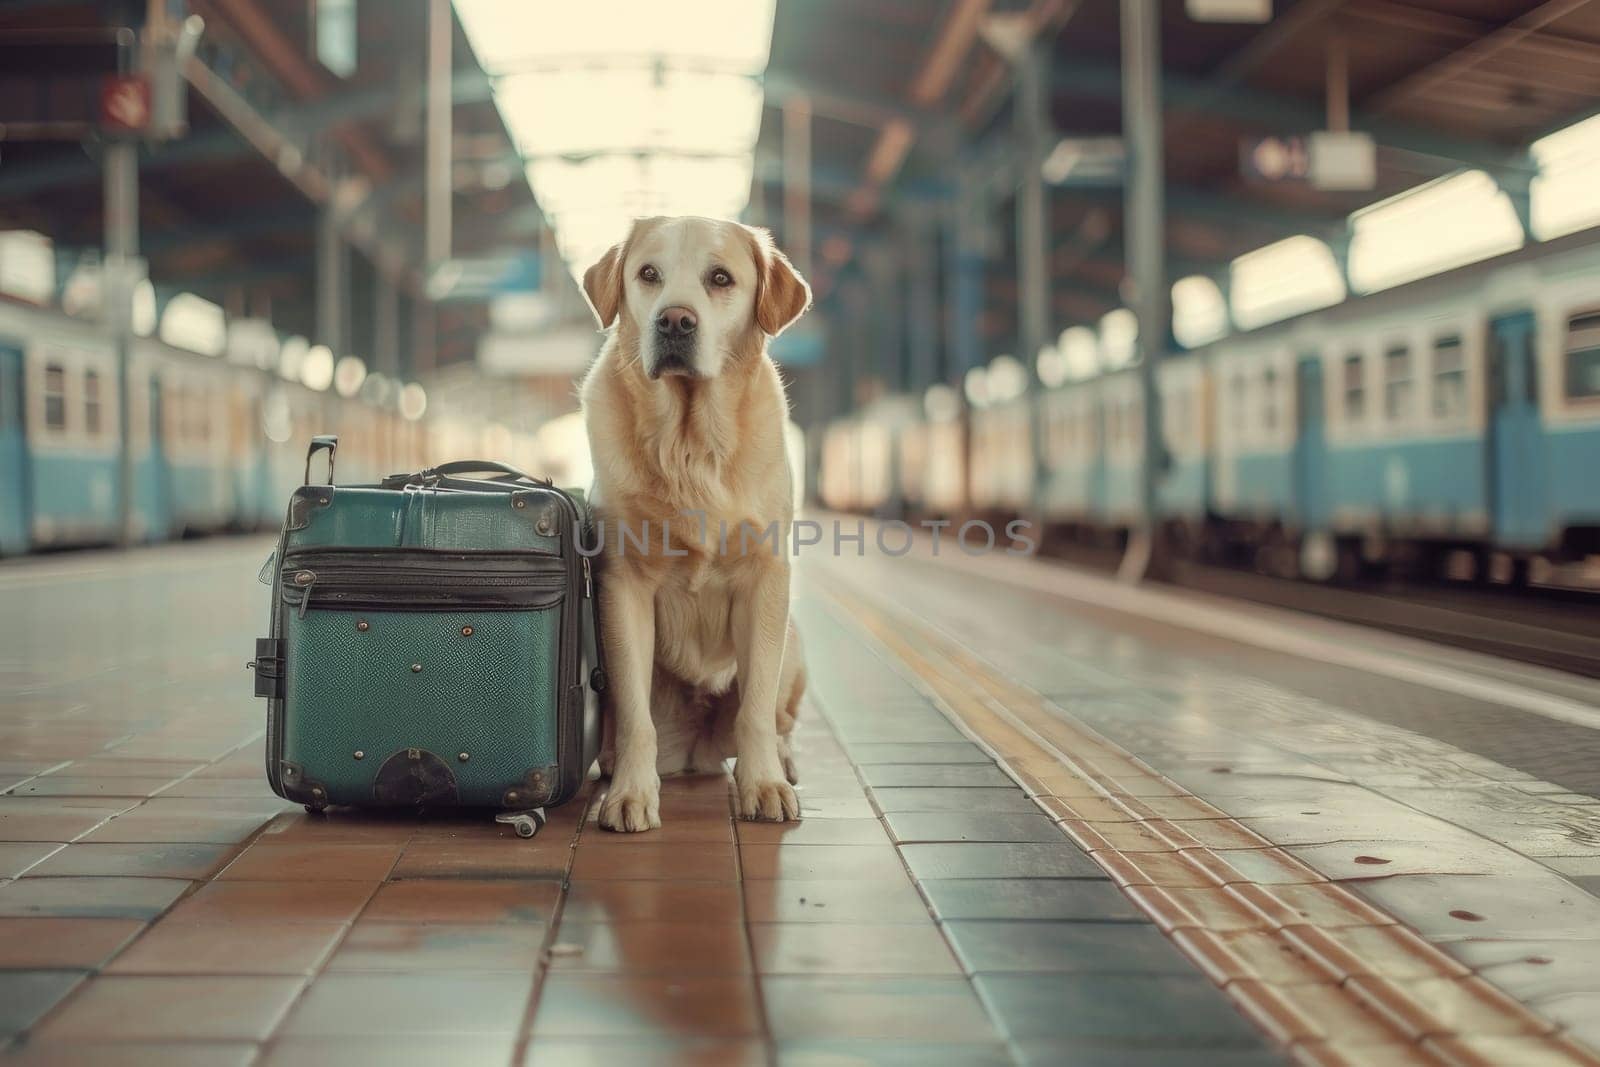 A Dog sits by a suitcase on the platform of the railway station, Traveling with a pet.